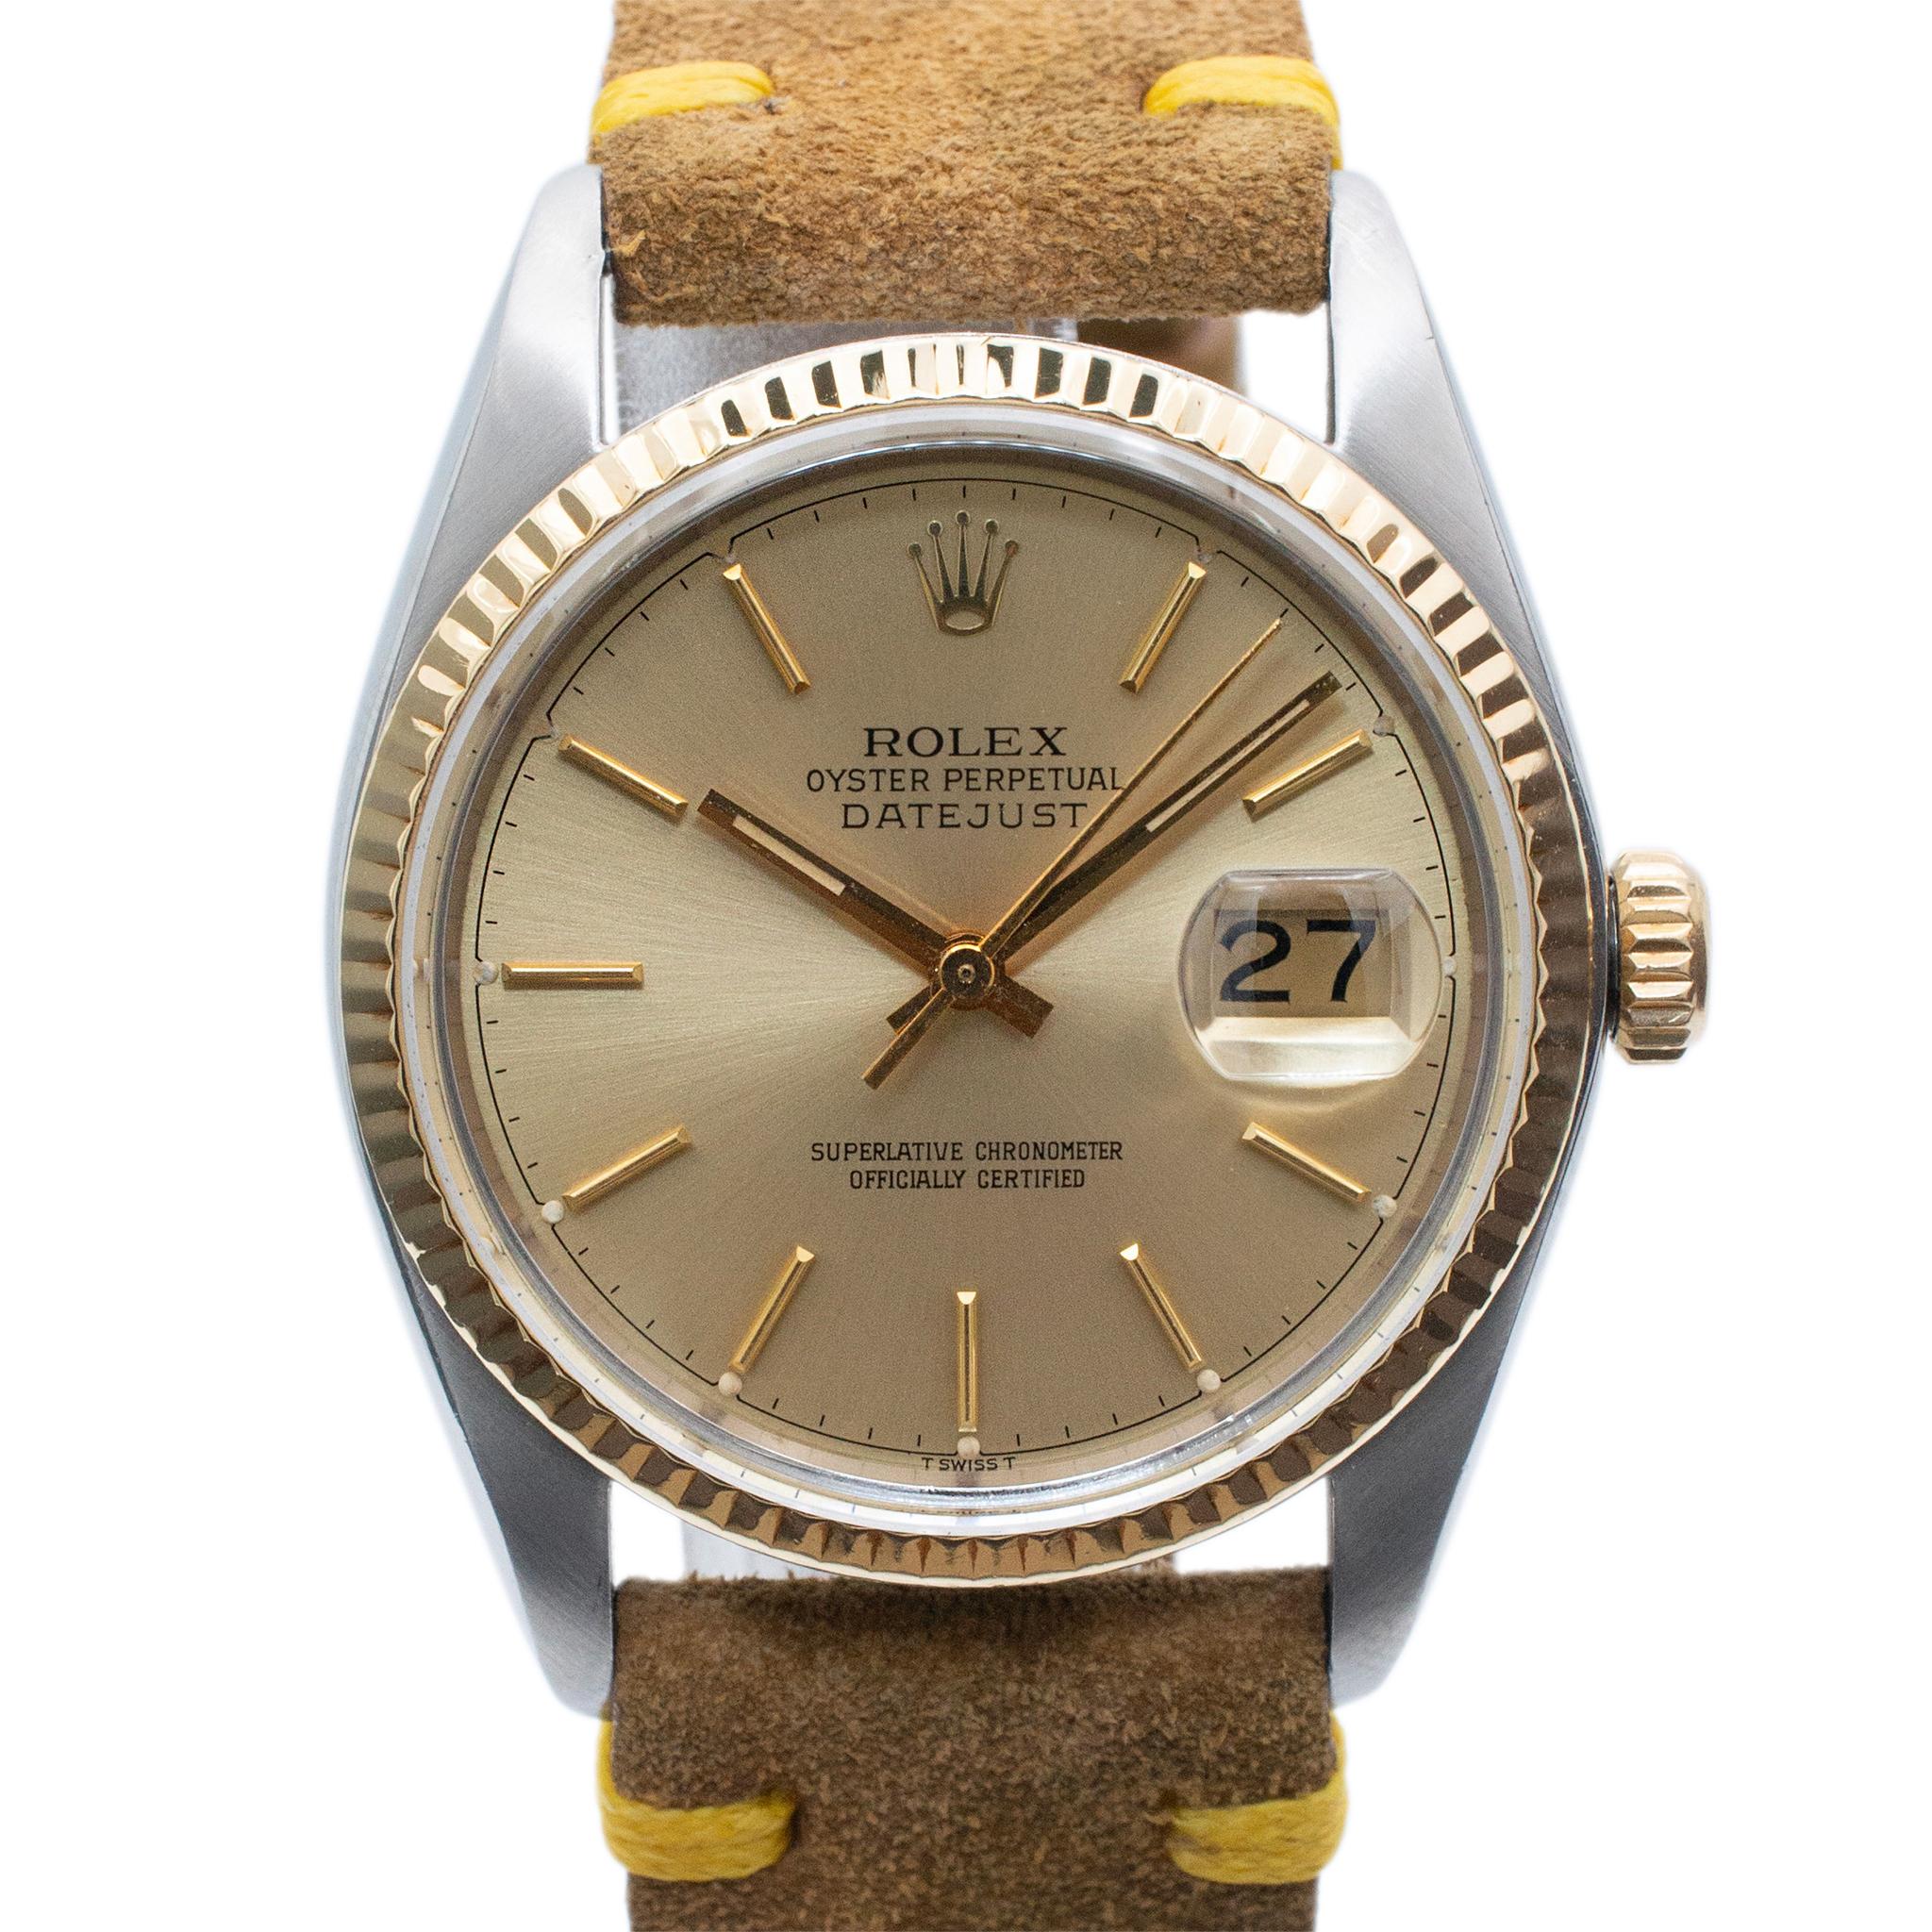 Brand: Rolex

Gender: Unisex

Metal Type: Stainless Steel and 18K Yellow Gold

Diameter: 36.00 mm

Weight: 62.38 grams

Stainless steel and 18K yellow gold, ROLEX Swiss-made watch.

The metals were tested and determined to be stainless steel and 18